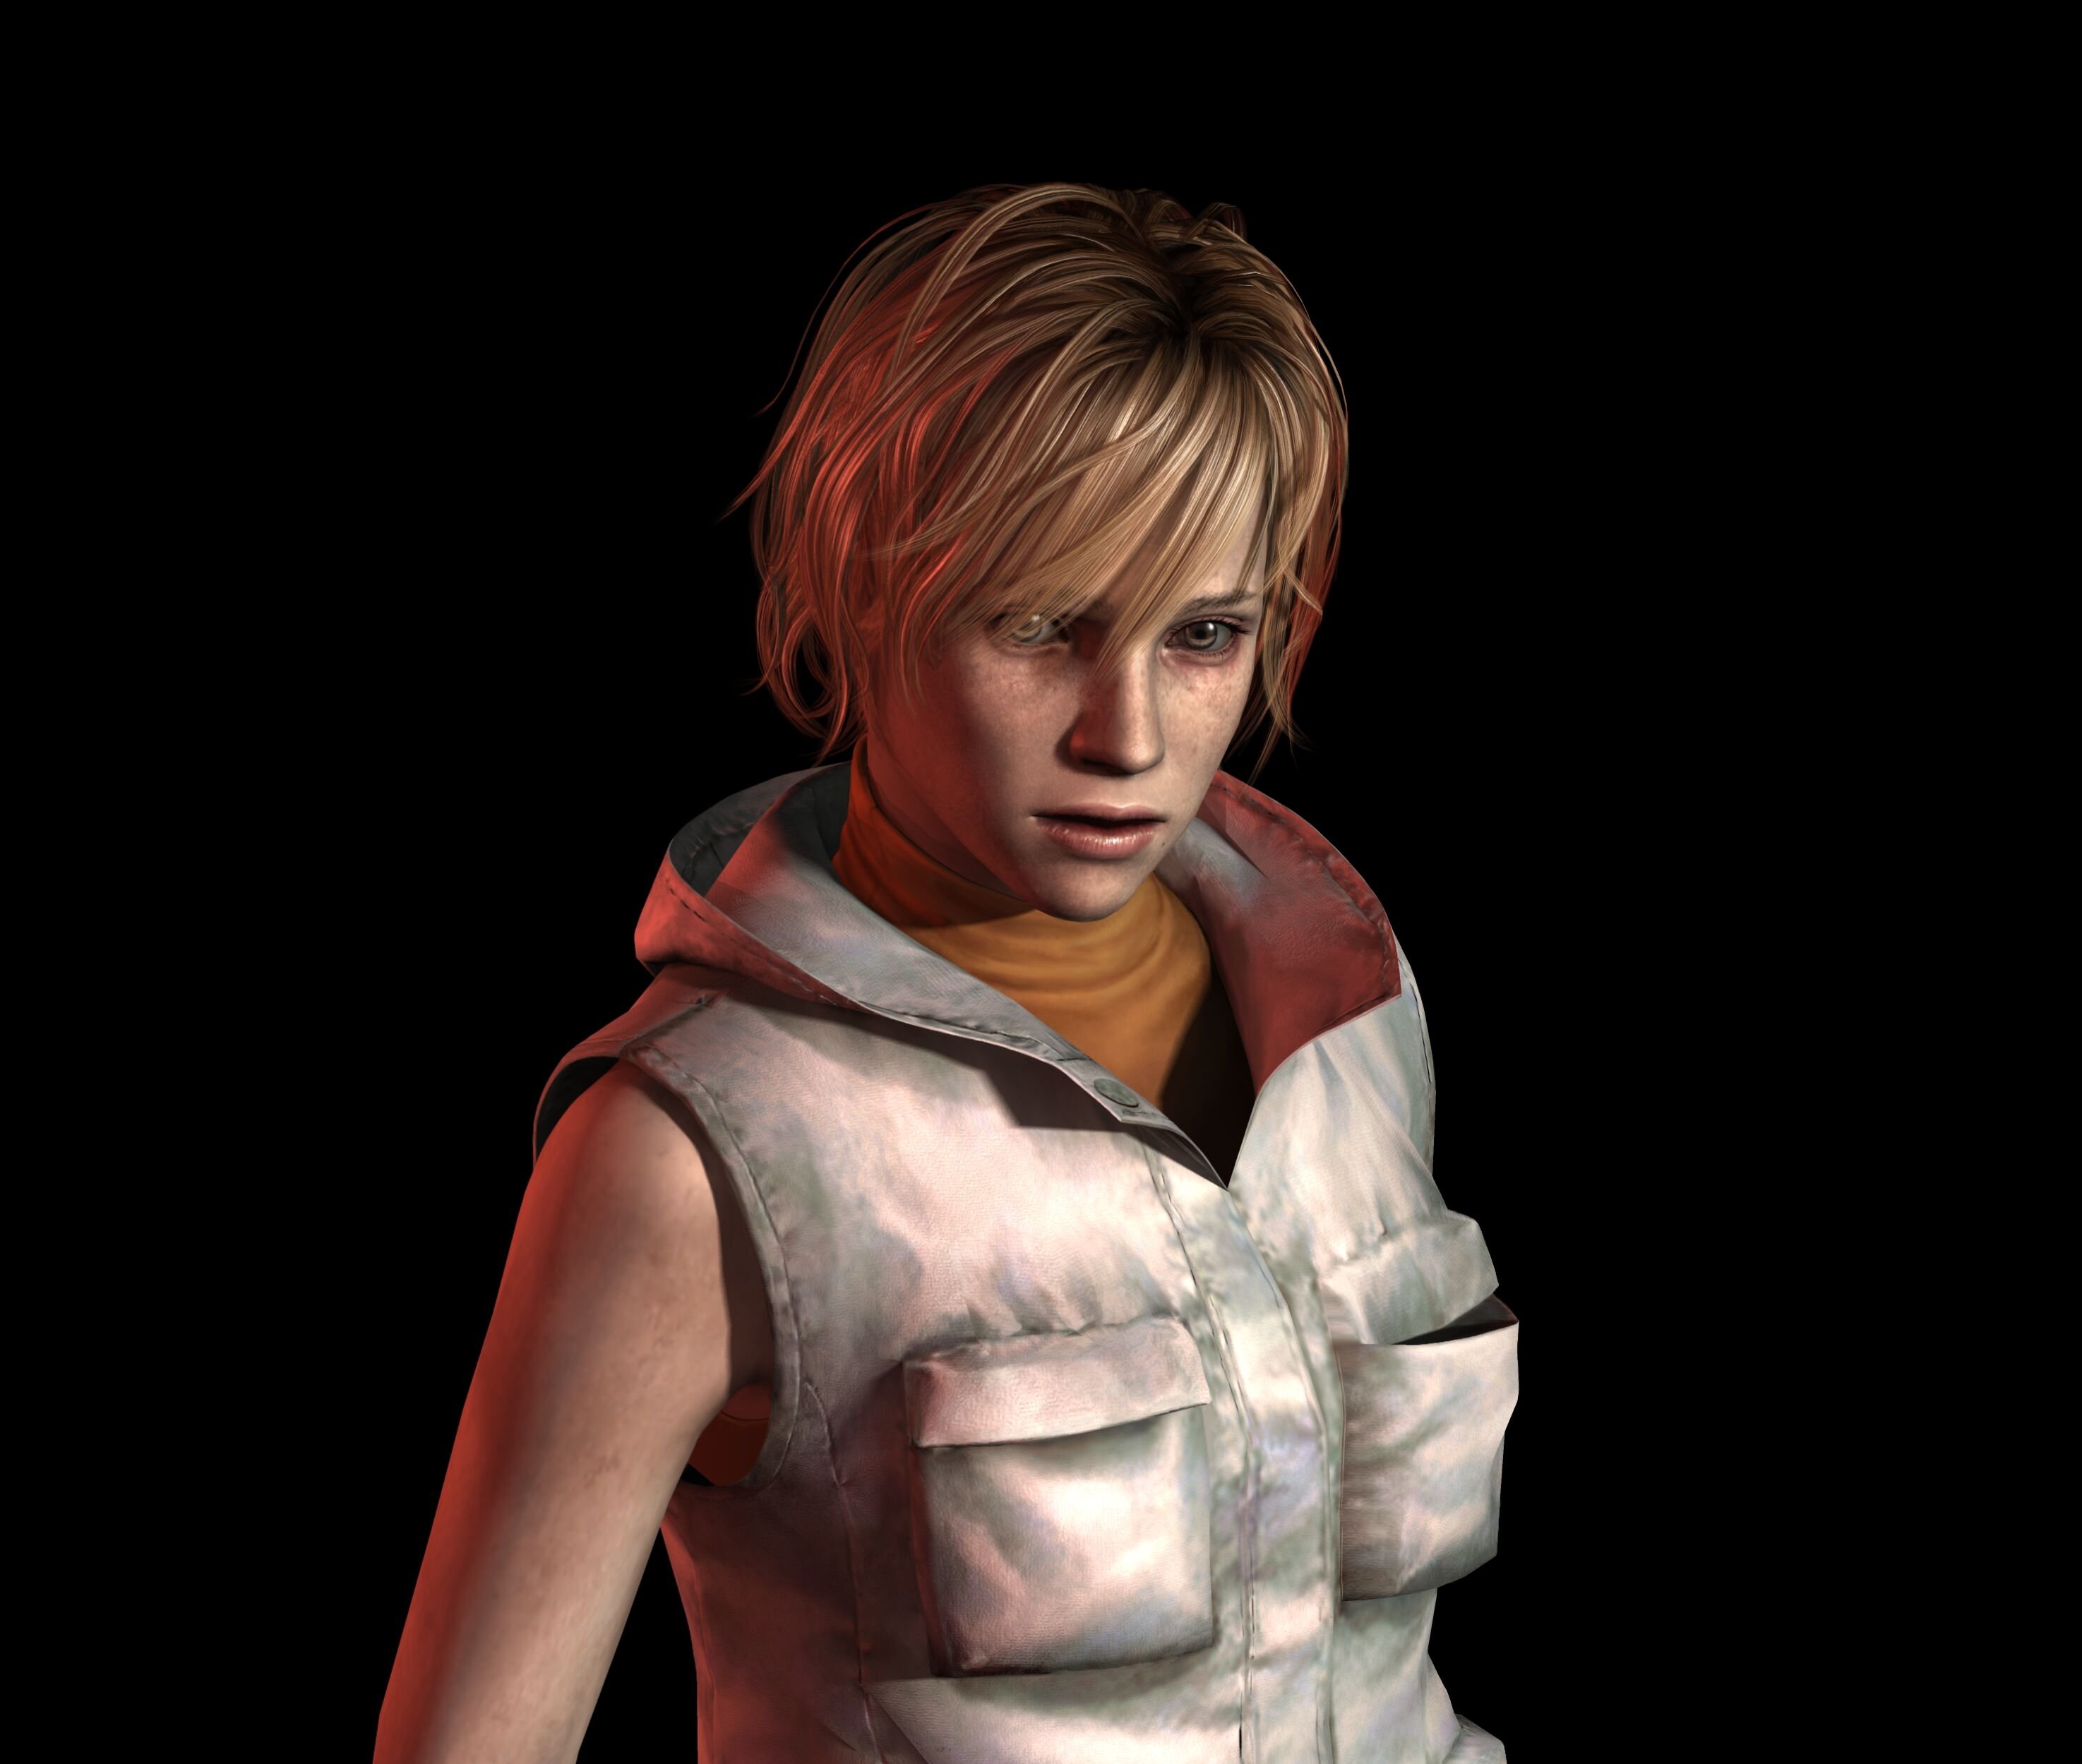 Wallpaper, heather mason, Silent Hill Silent Hill, video game characters, video games, blonde, short hair, black background 2949x2499